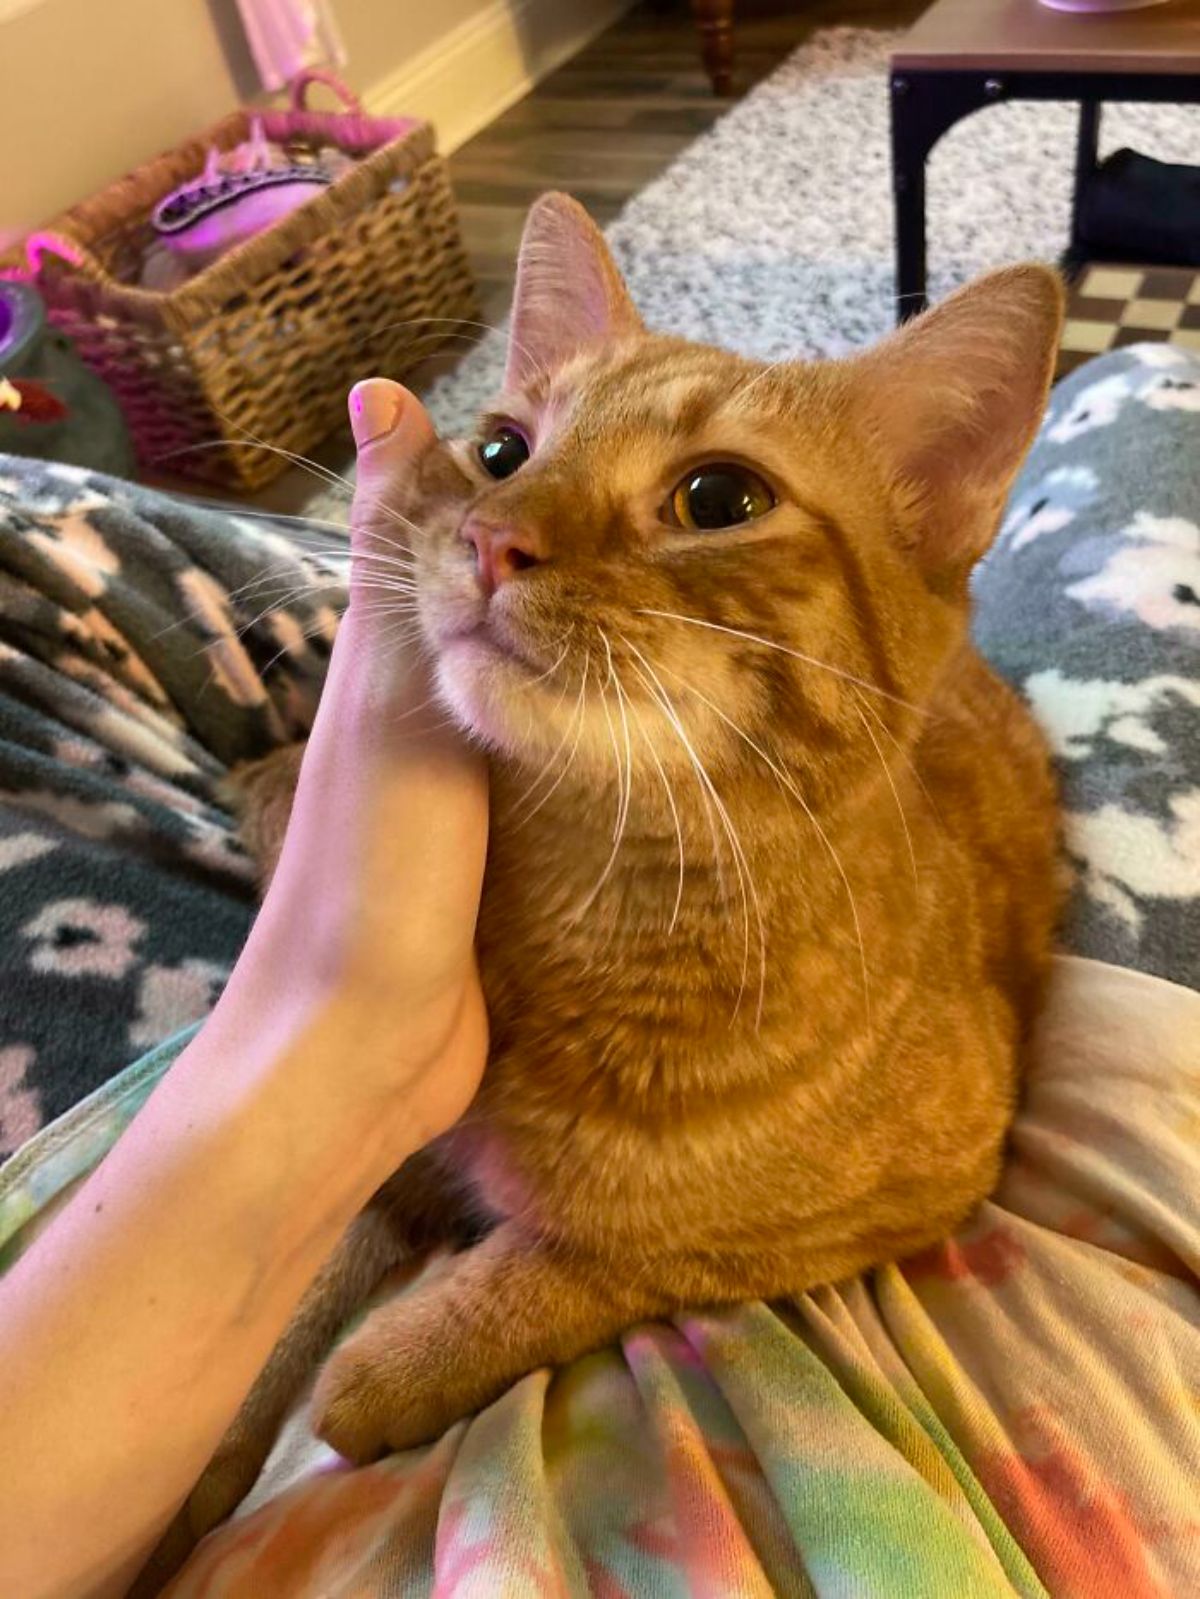 orange cat sitting on someone's lap and looking up lovingly while being petted